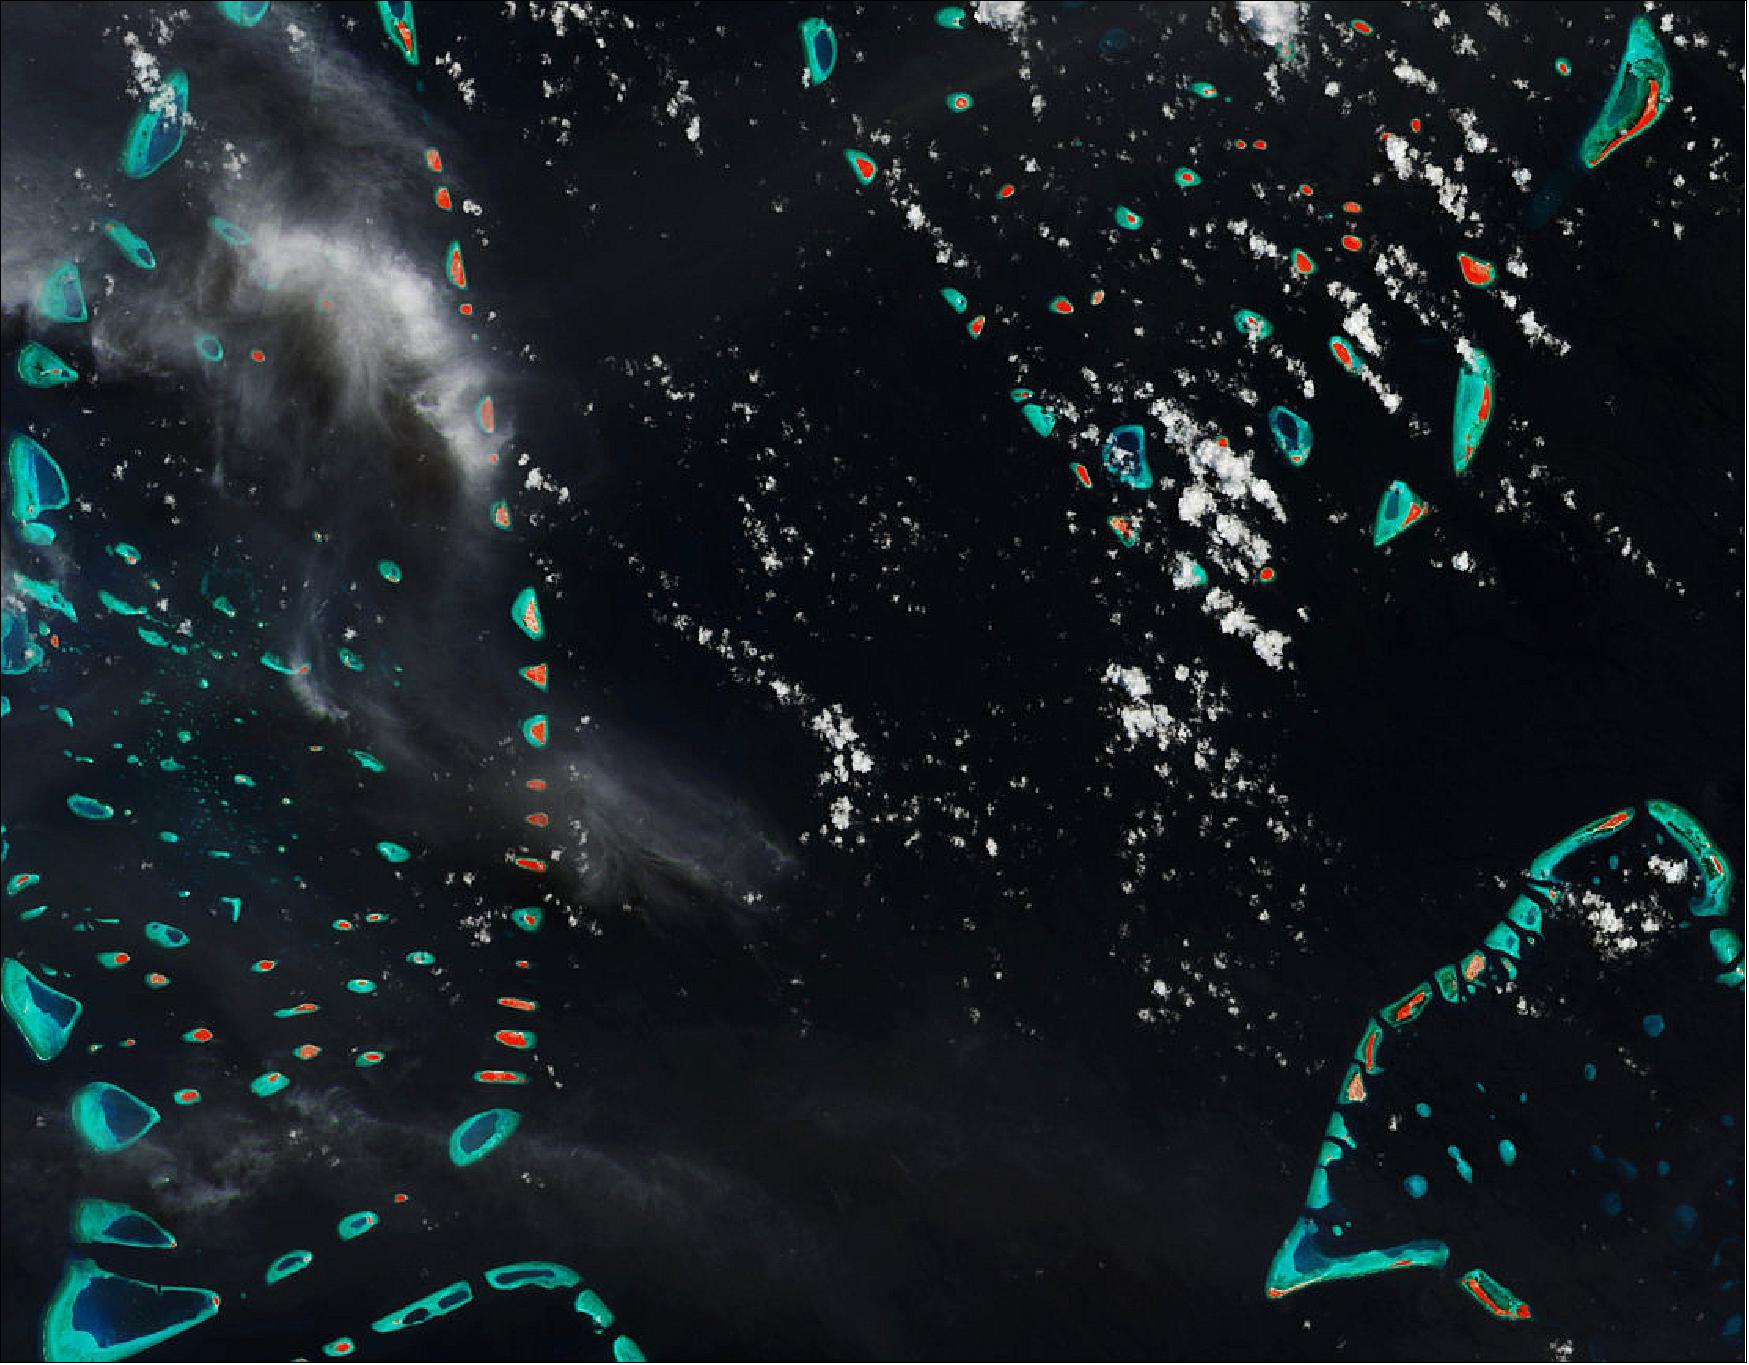 Figure 50: A number of these little islands can be seen in the image, with the turquoise colors depicting clear shallow waters dotted by coral reefs and the red colors highlighting vegetation on land. Different cloud formations can also be seen, the difference in appearance is likely to be due to the different height above the surface. This image, which was captured on 26 August 2015, is also featured on the Earth from Space video program (image credit: ESA, the image contains modified Copernicus Sentinel data (2015), processed by ESA, CC BY-SA 3.0 IGO)